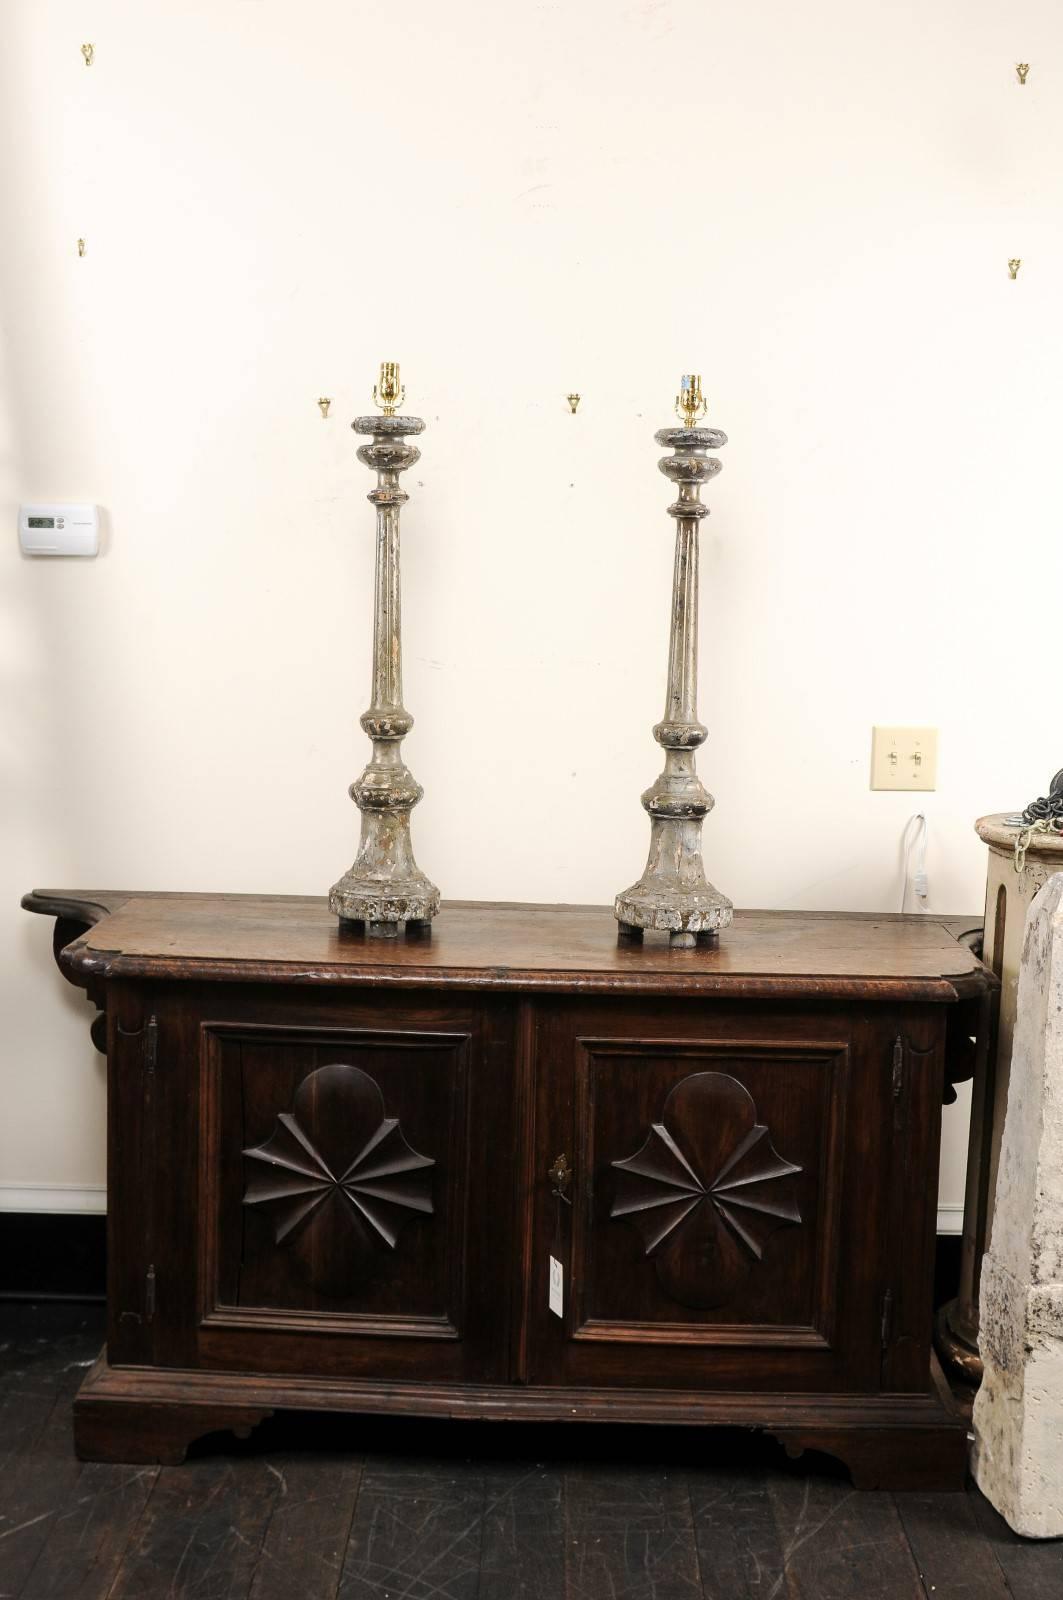 Pair of Italian 19th Century Carved Wood Altar Sticks Made into Table Lamps 7